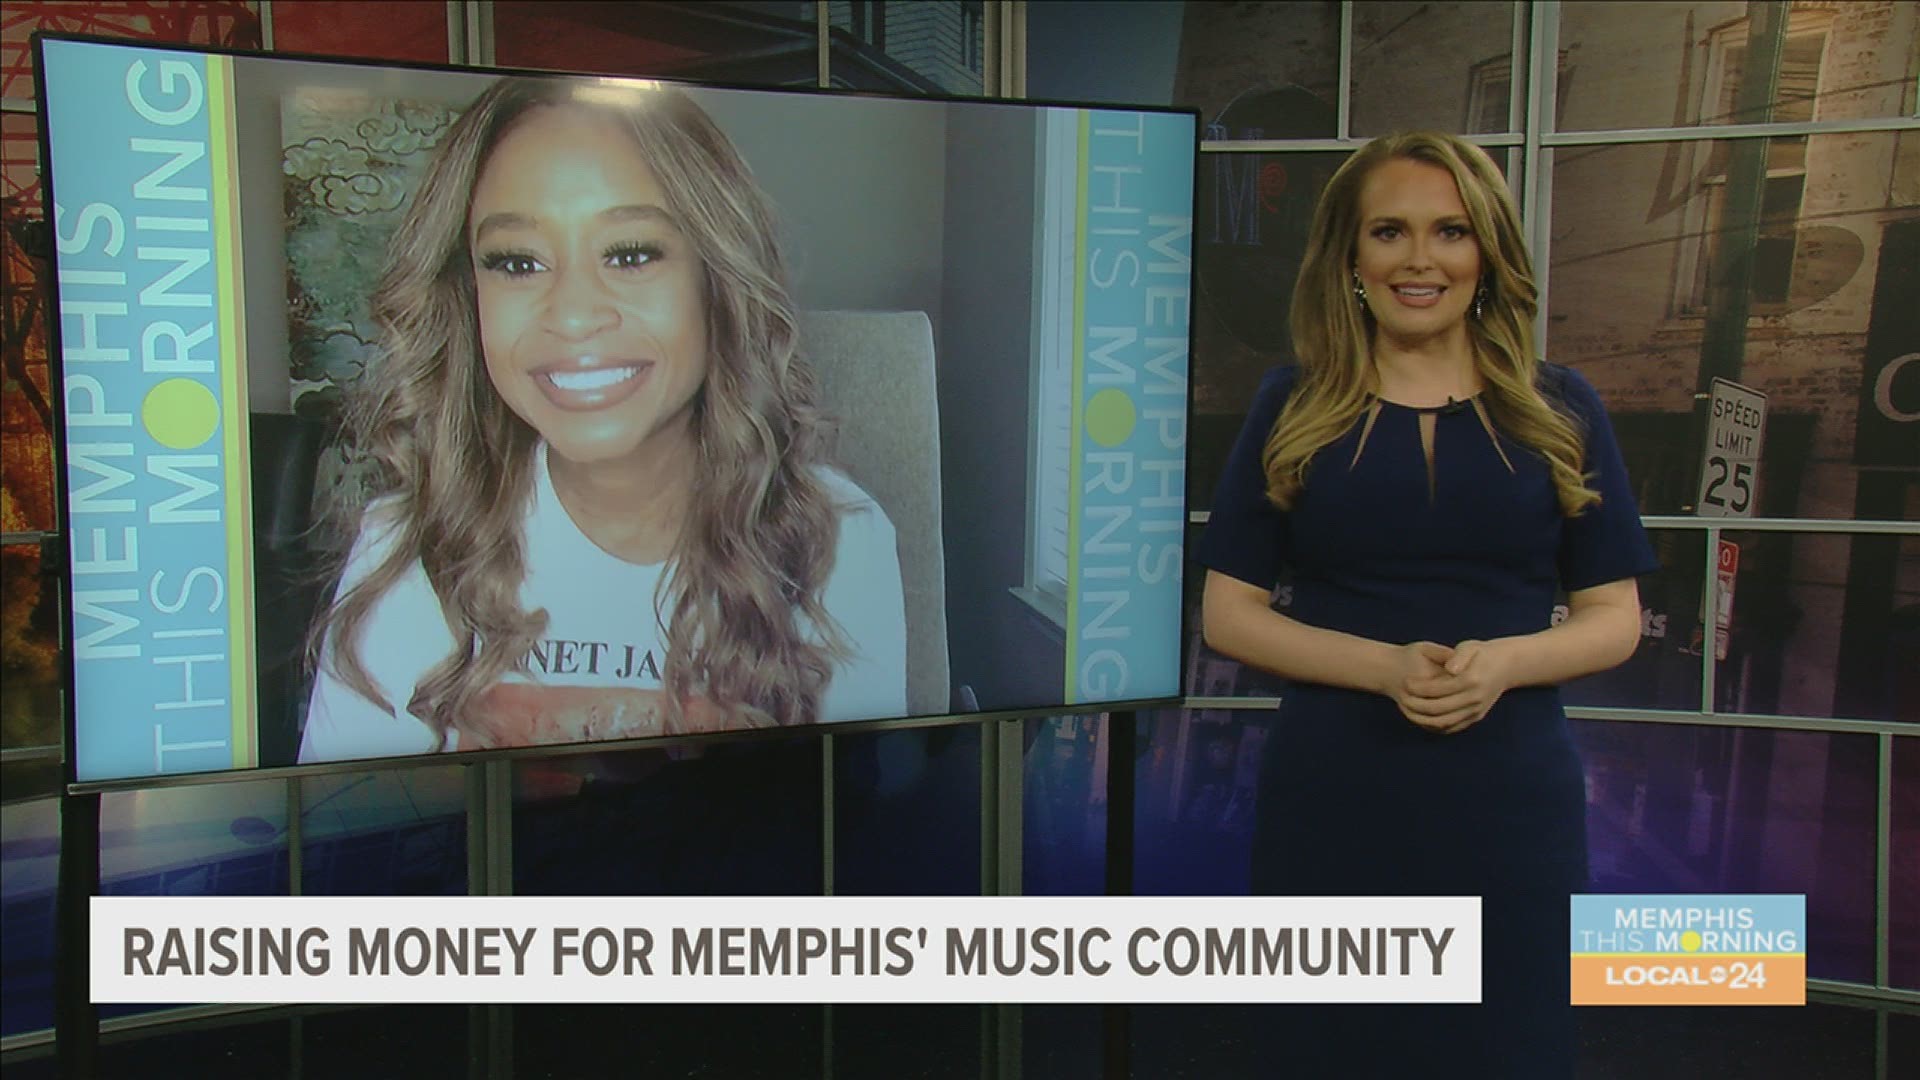 Made In Memphis Entertainment artist Jessica Ray is performing Raw: Live Performance to raise money for the Memphis music community.